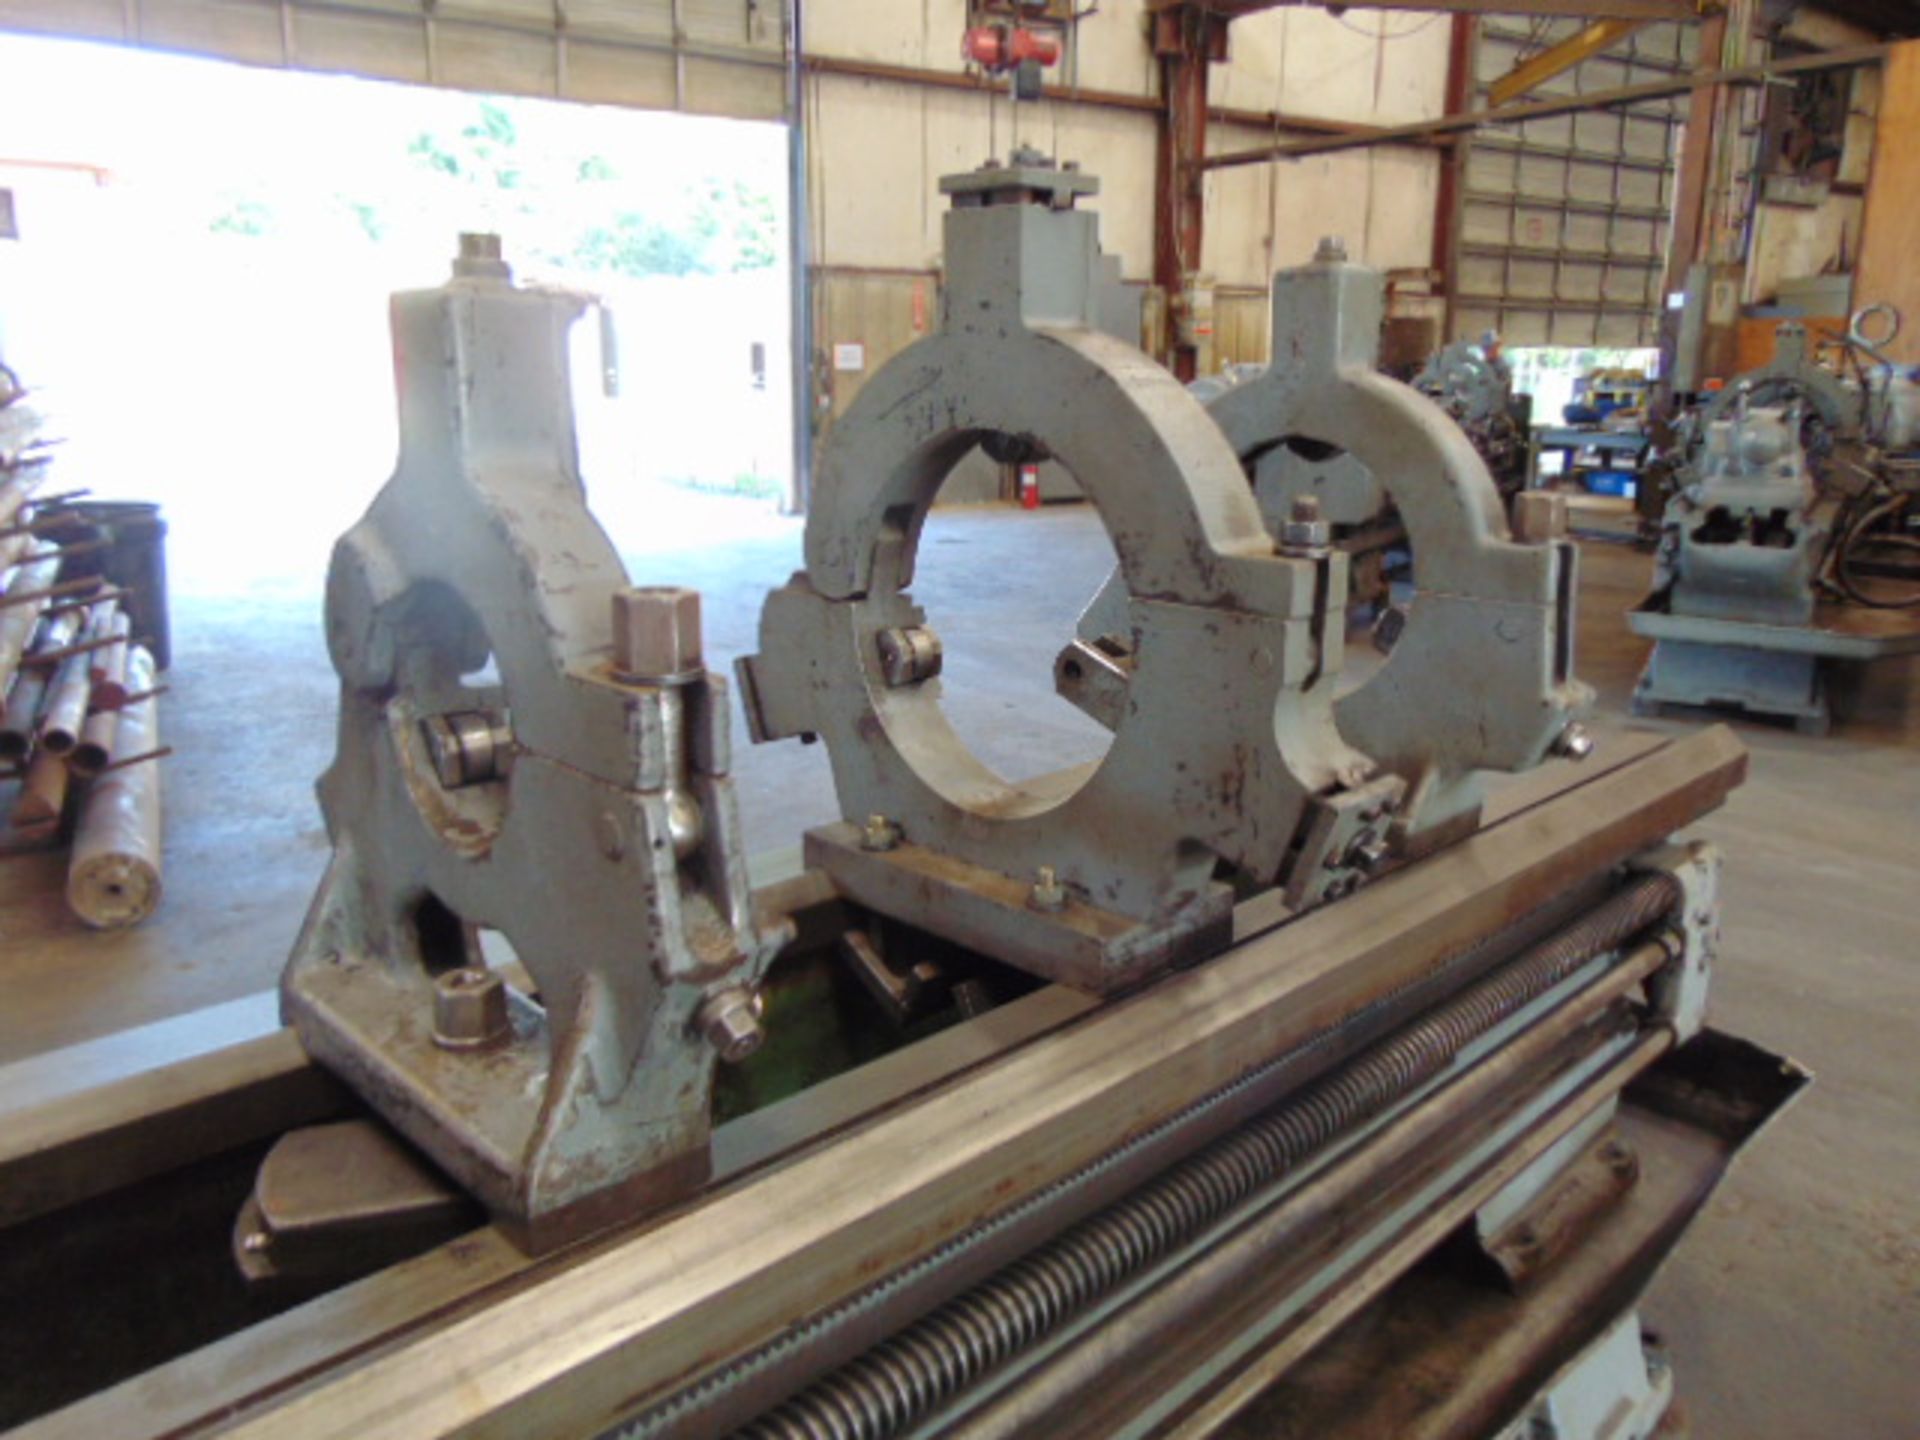 ENGINE LATHE, AXELSON SIZE 2516, 25” max. swing, 120” centers, spdl. spds: 9.5-961 RPM, 2-1/2” spdl. - Image 8 of 10